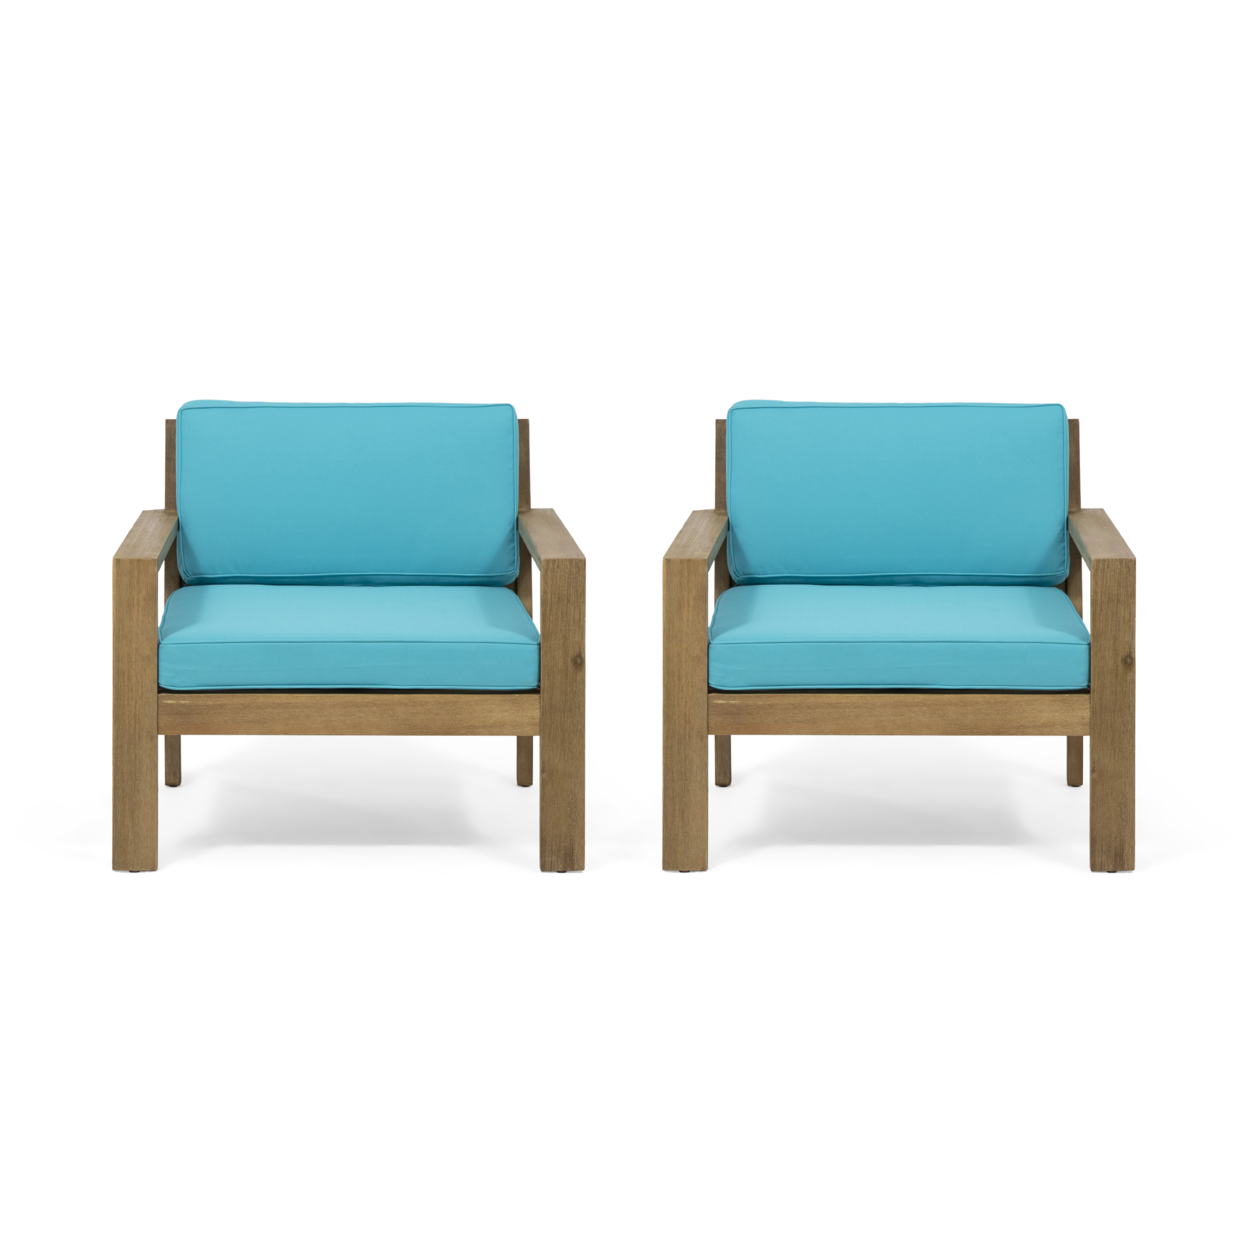 Miranda Outdoor Acacia Wood Club Chairs With Cushions (Set Of 2) - Brushed Light Brown Finish, Dark Teal